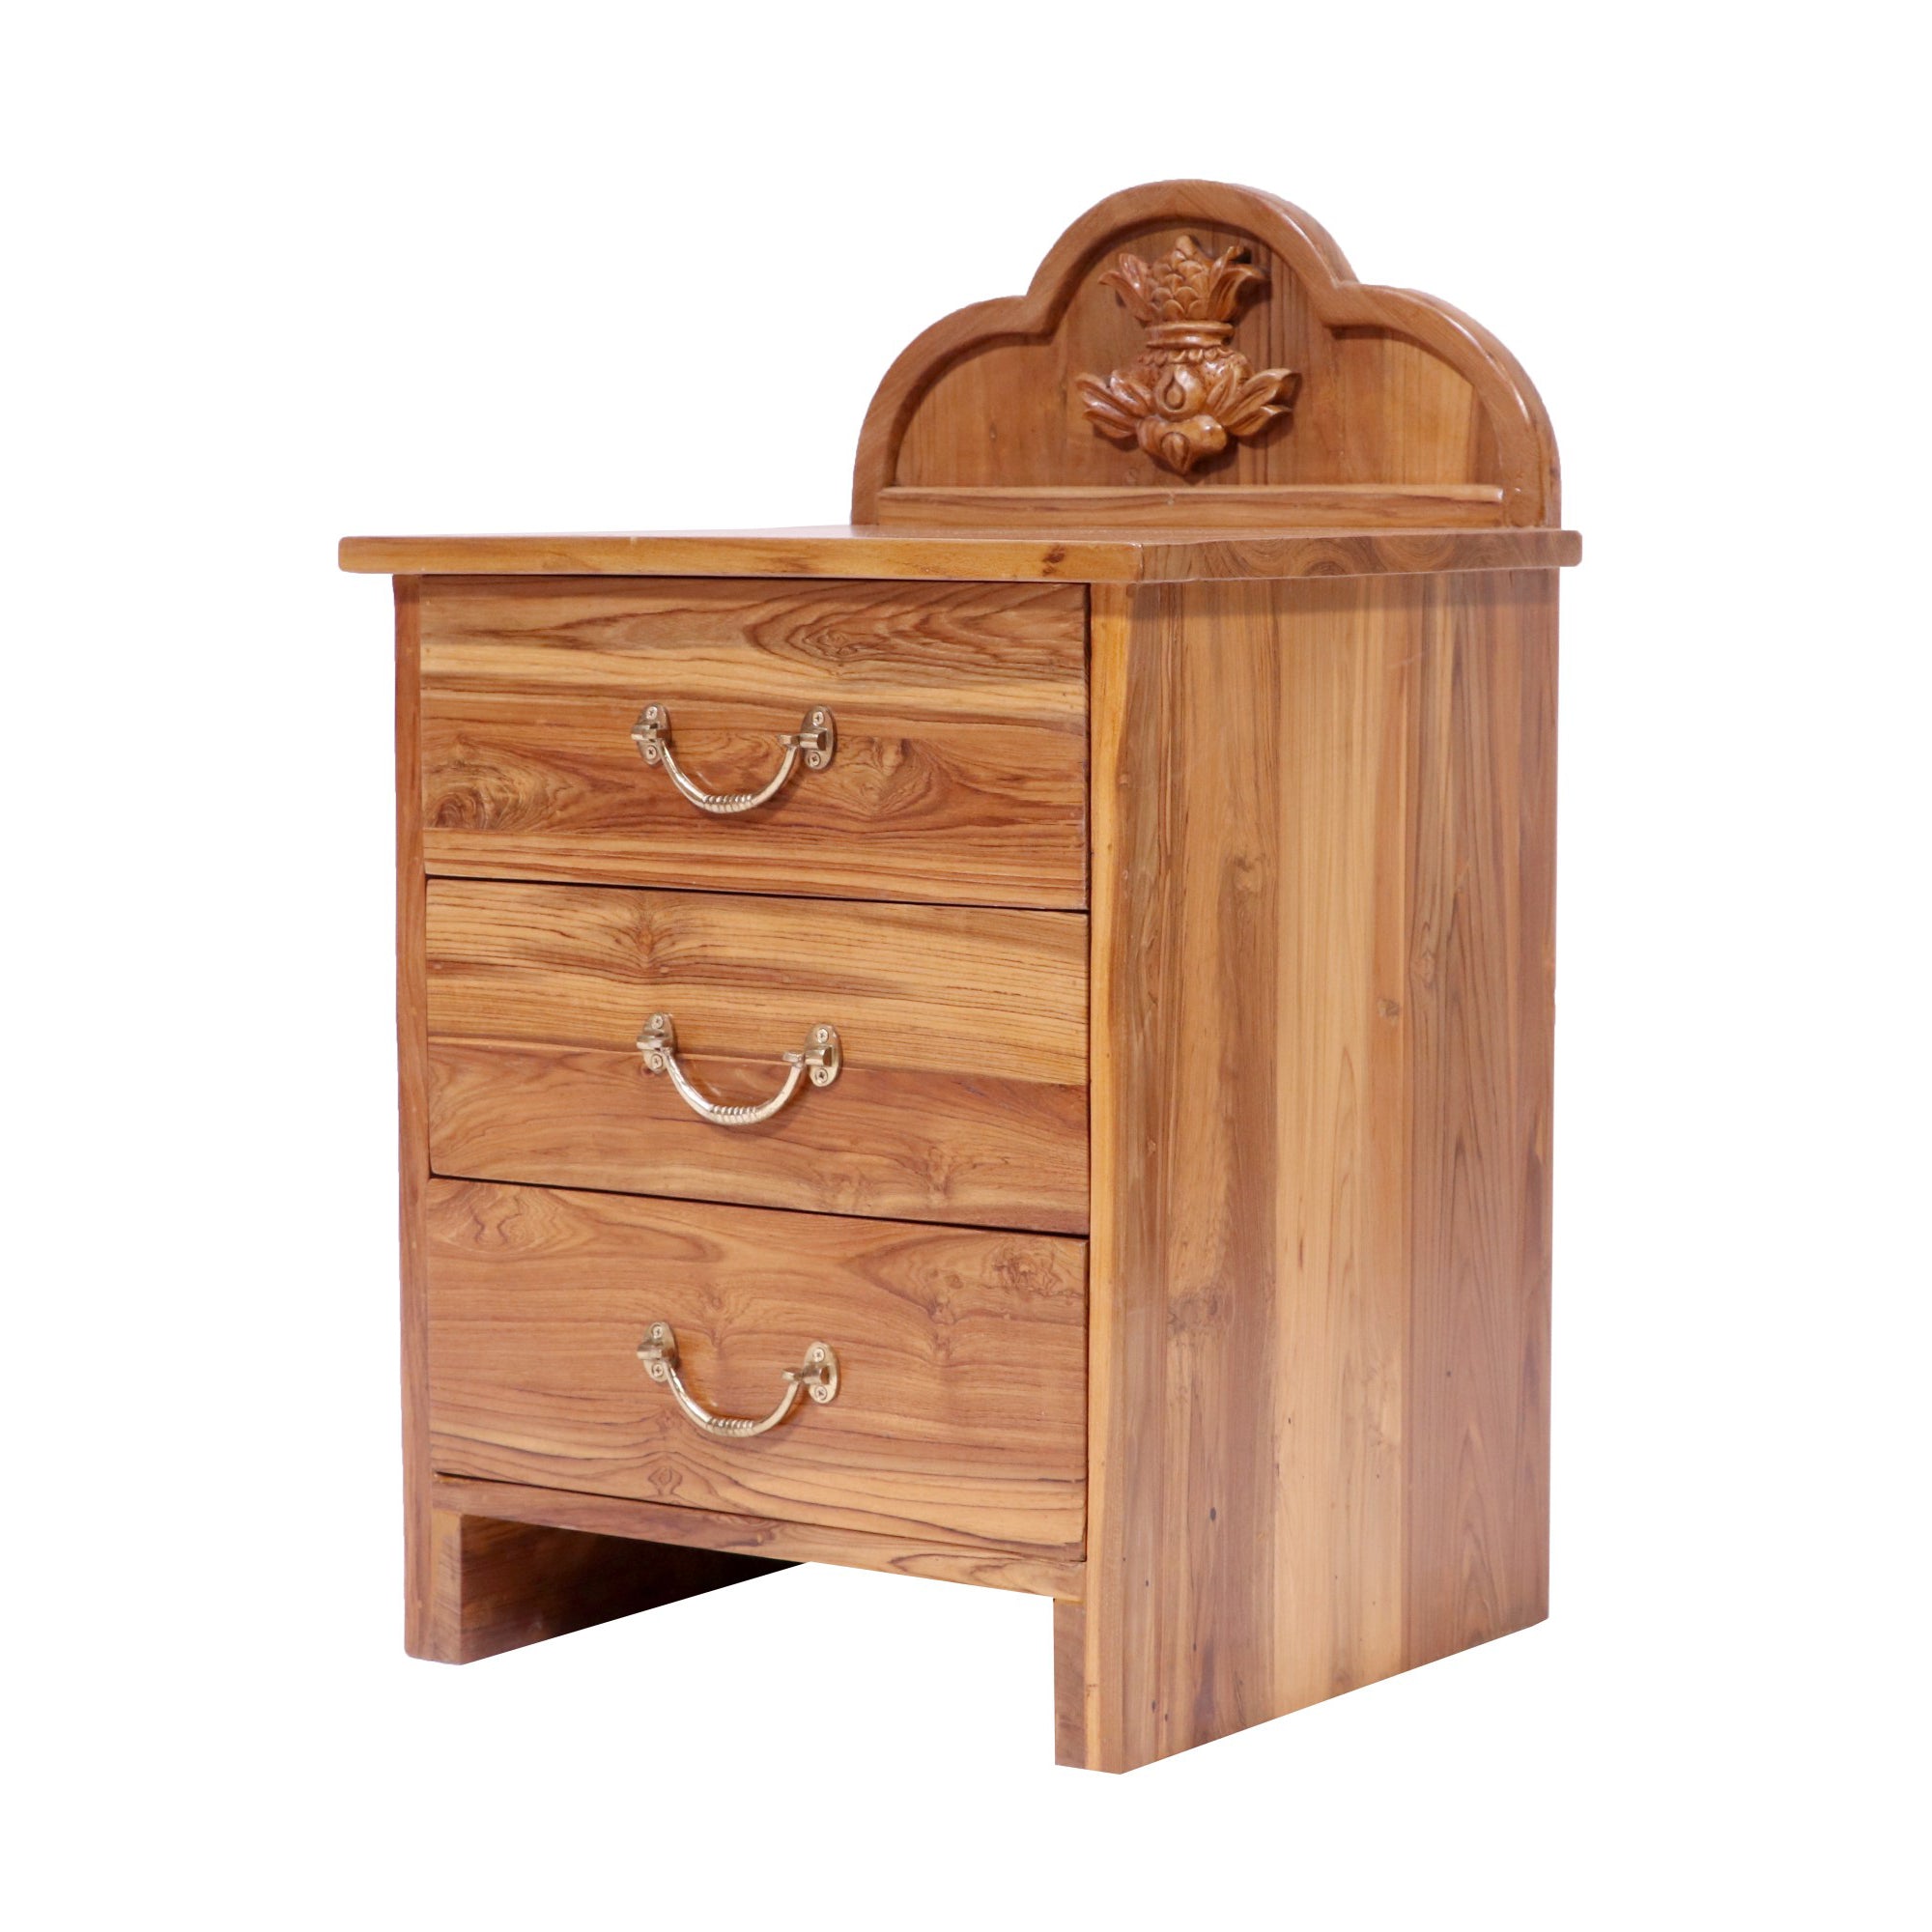 Traditional Teak wood 3 drawers with Kalash Carving Bedside